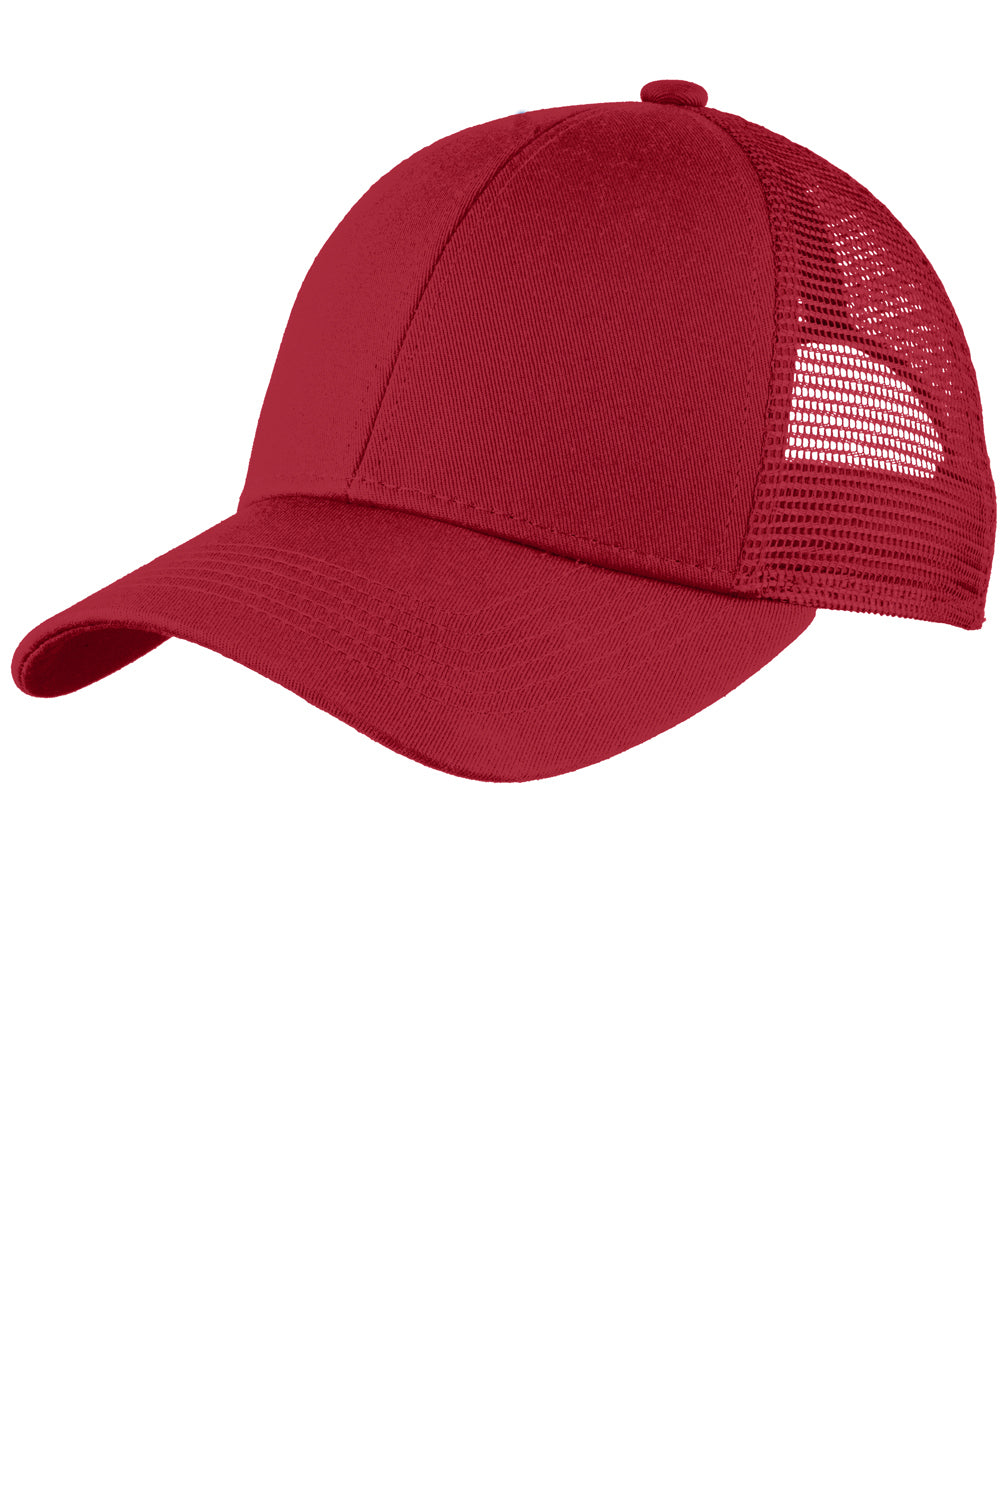 Port Authority C911 Adjustable Mesh Back Hat Chili Red Front